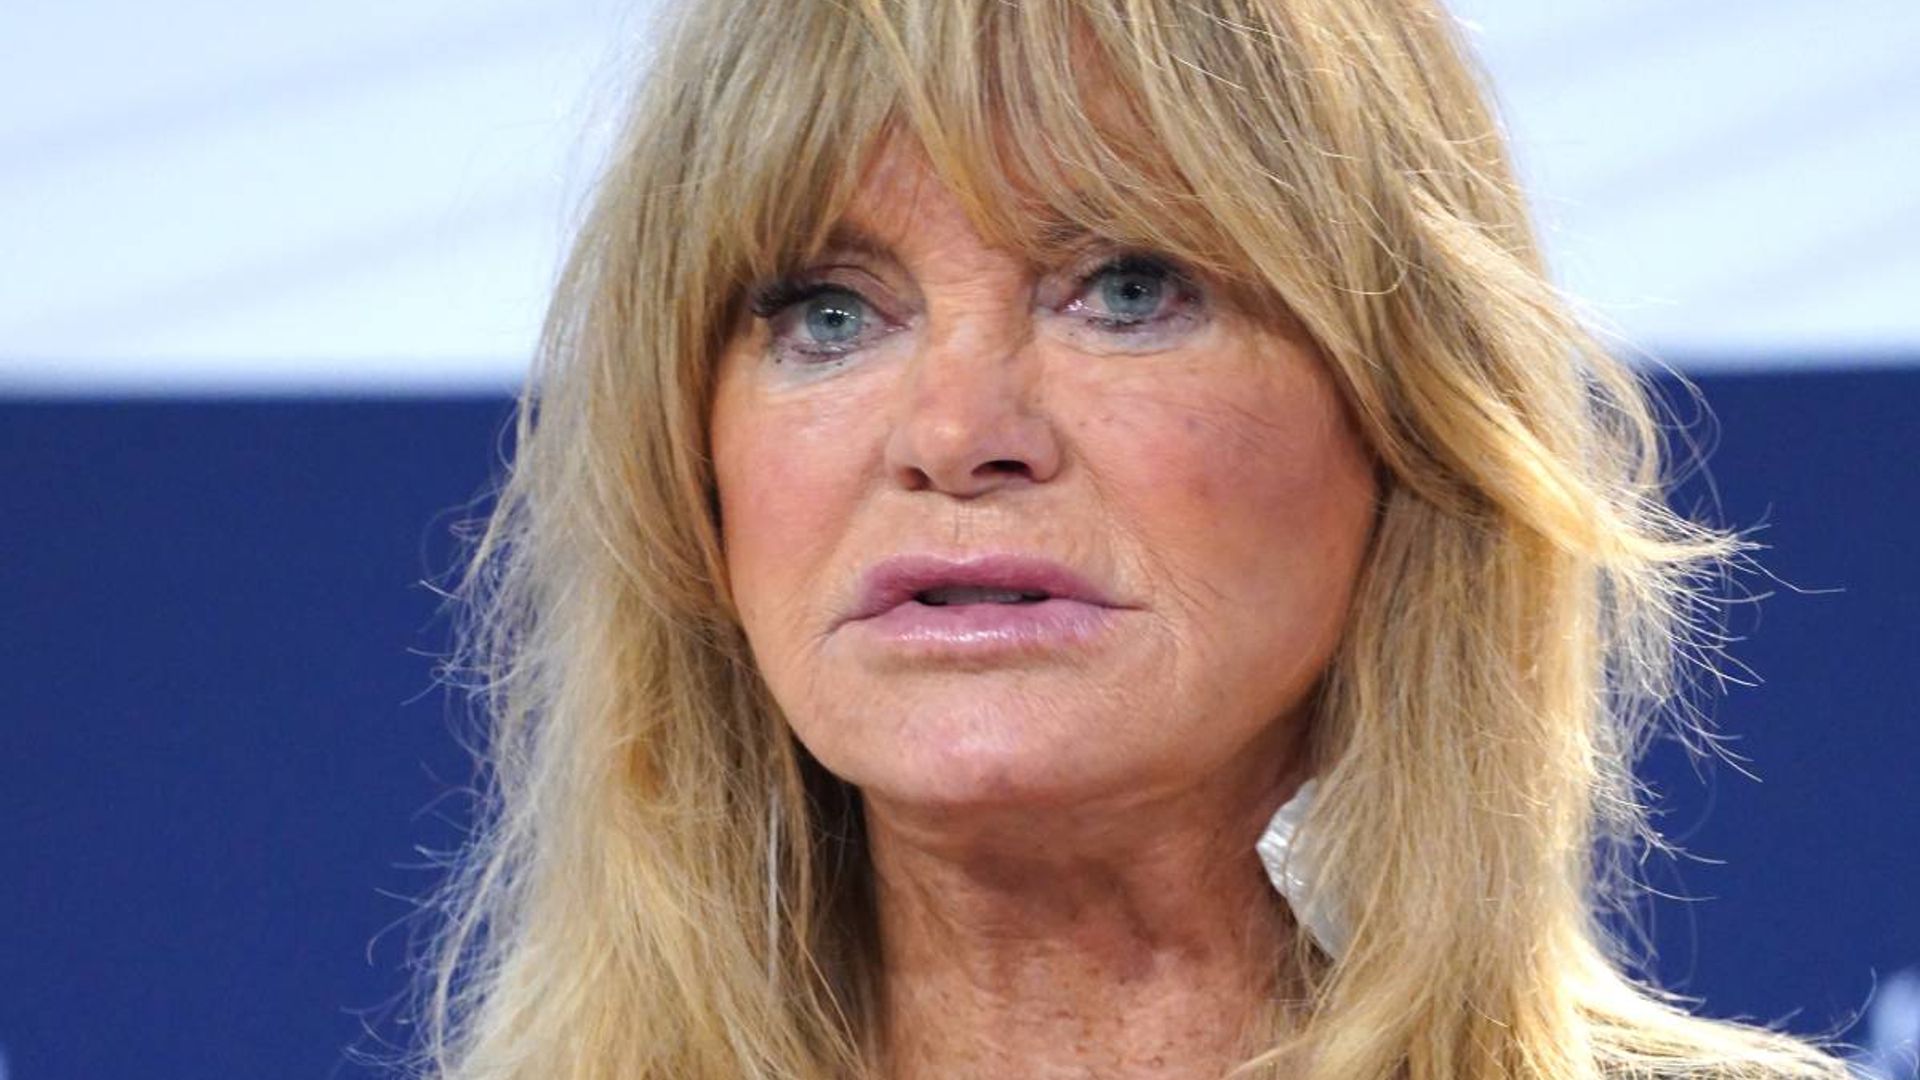 Goldie Hawn, 76, concerns fans with latest appearance as they urge her